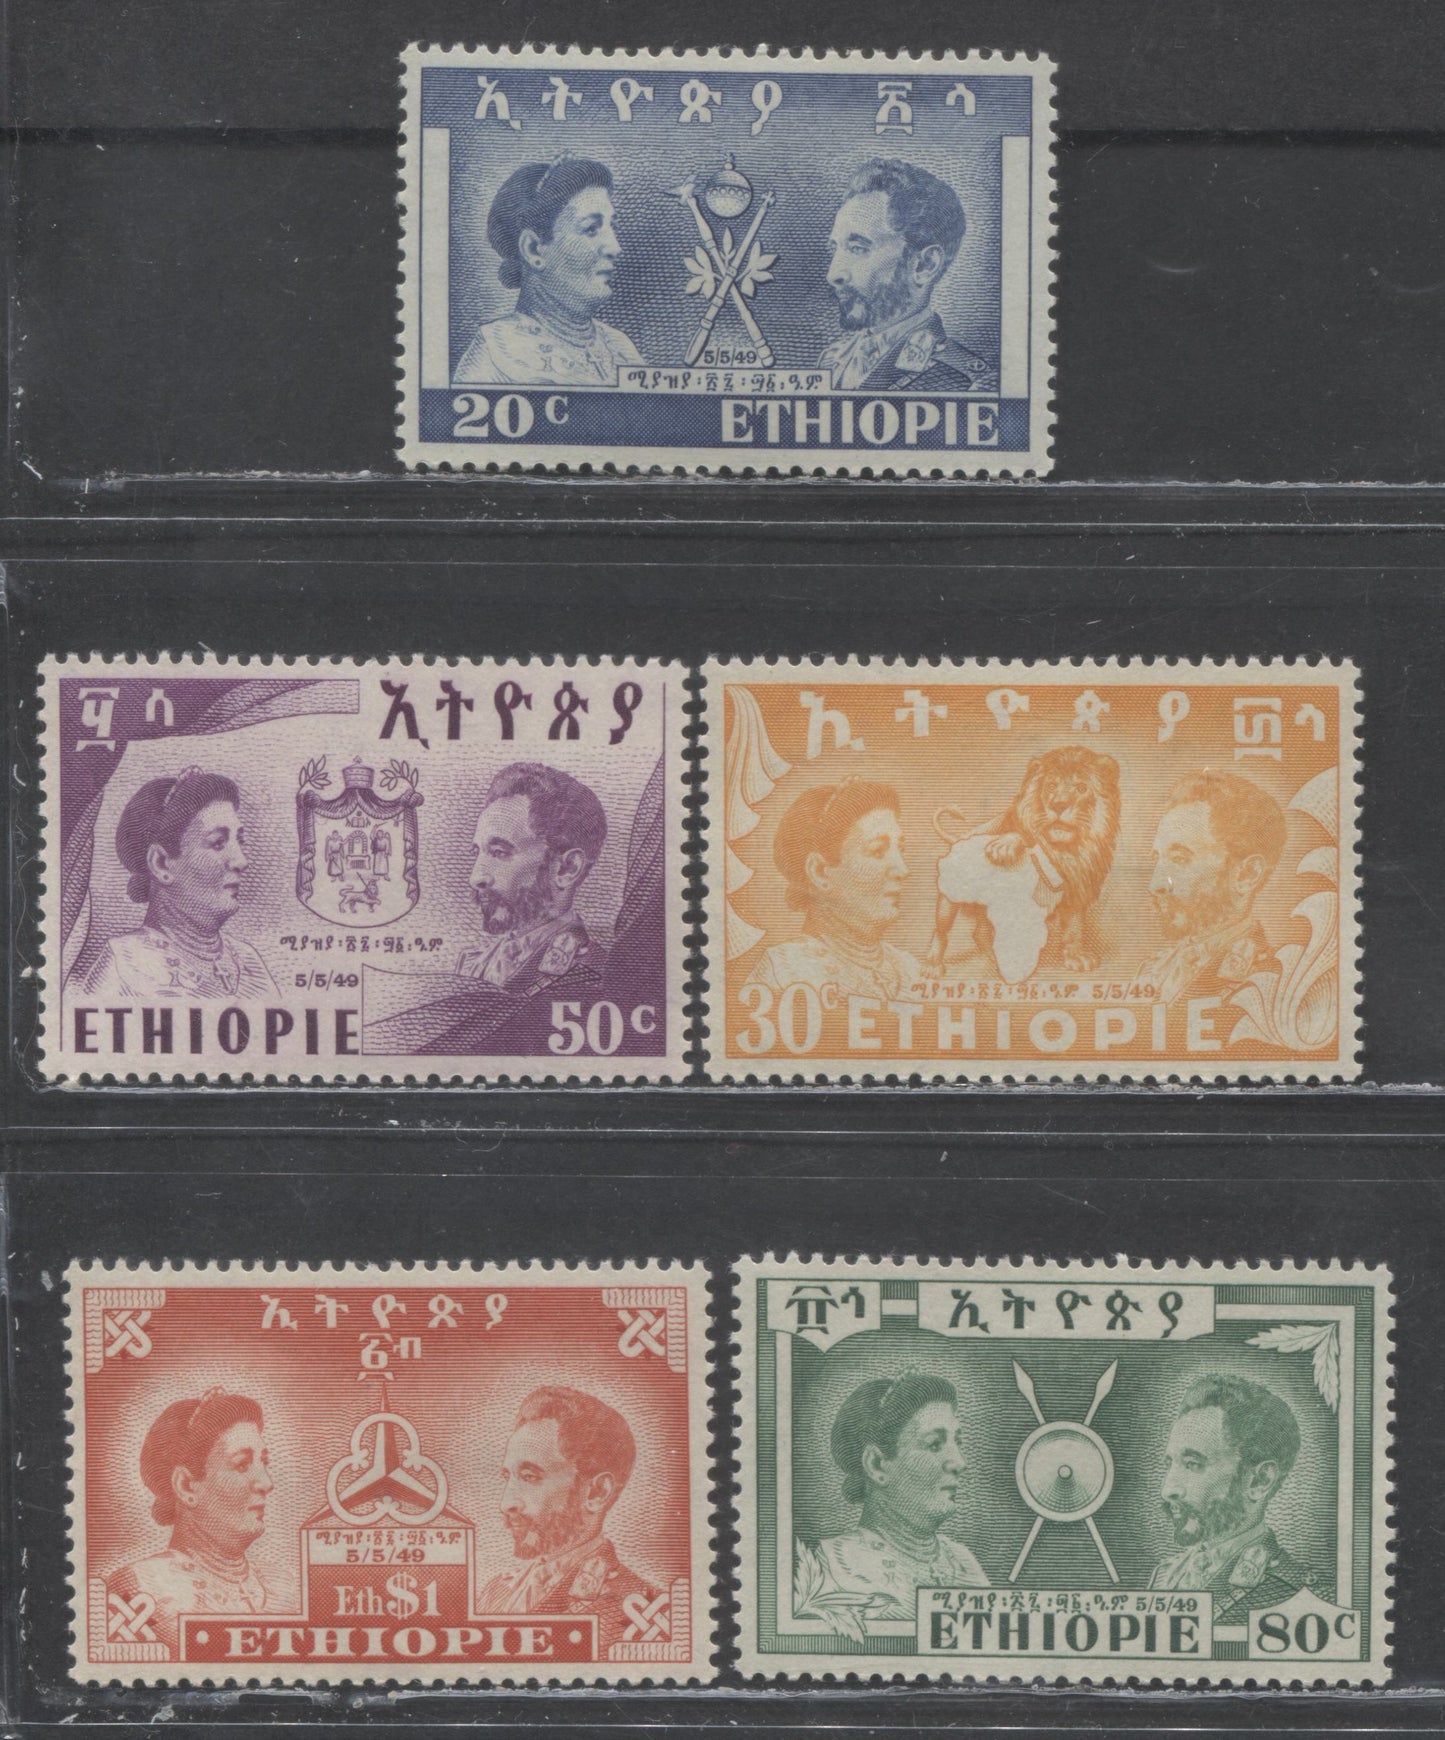 Lot 518 Ethiopia SC#297-301  1949, 8th Anniversary of Liberation From Italian Rule, 5 VFNH Singles, 2017 Scott Cat. $41 USD, Click on Listing to See ALL Pictures